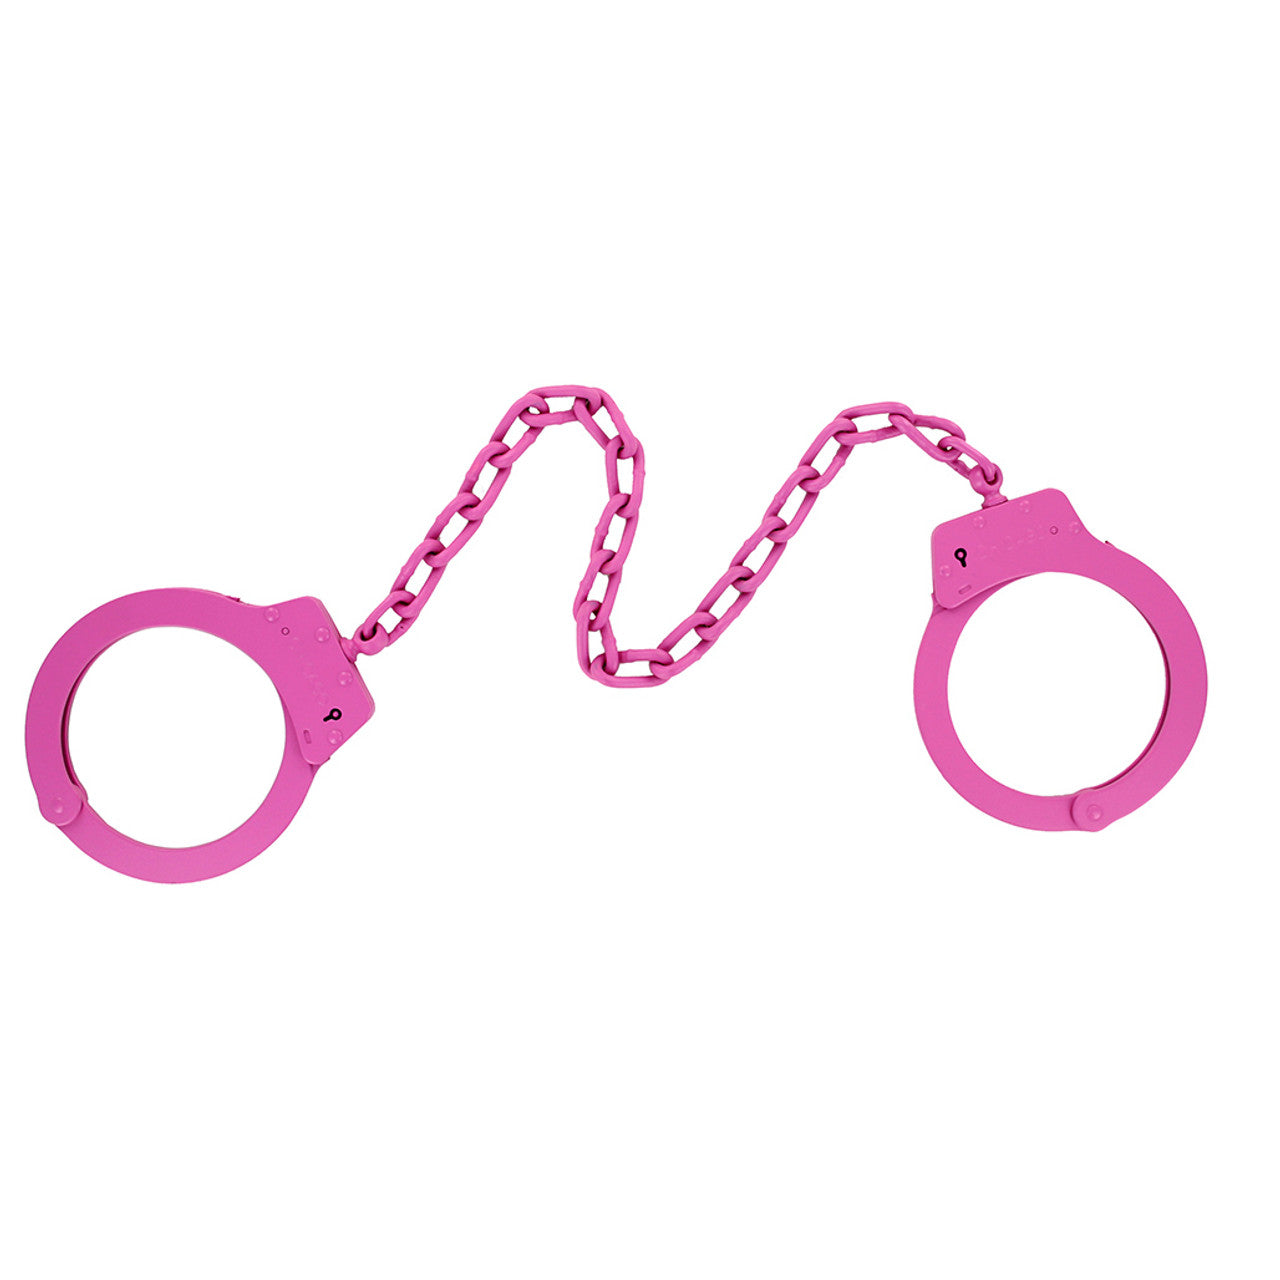 Chicago 2200 Leg Irons in Pink